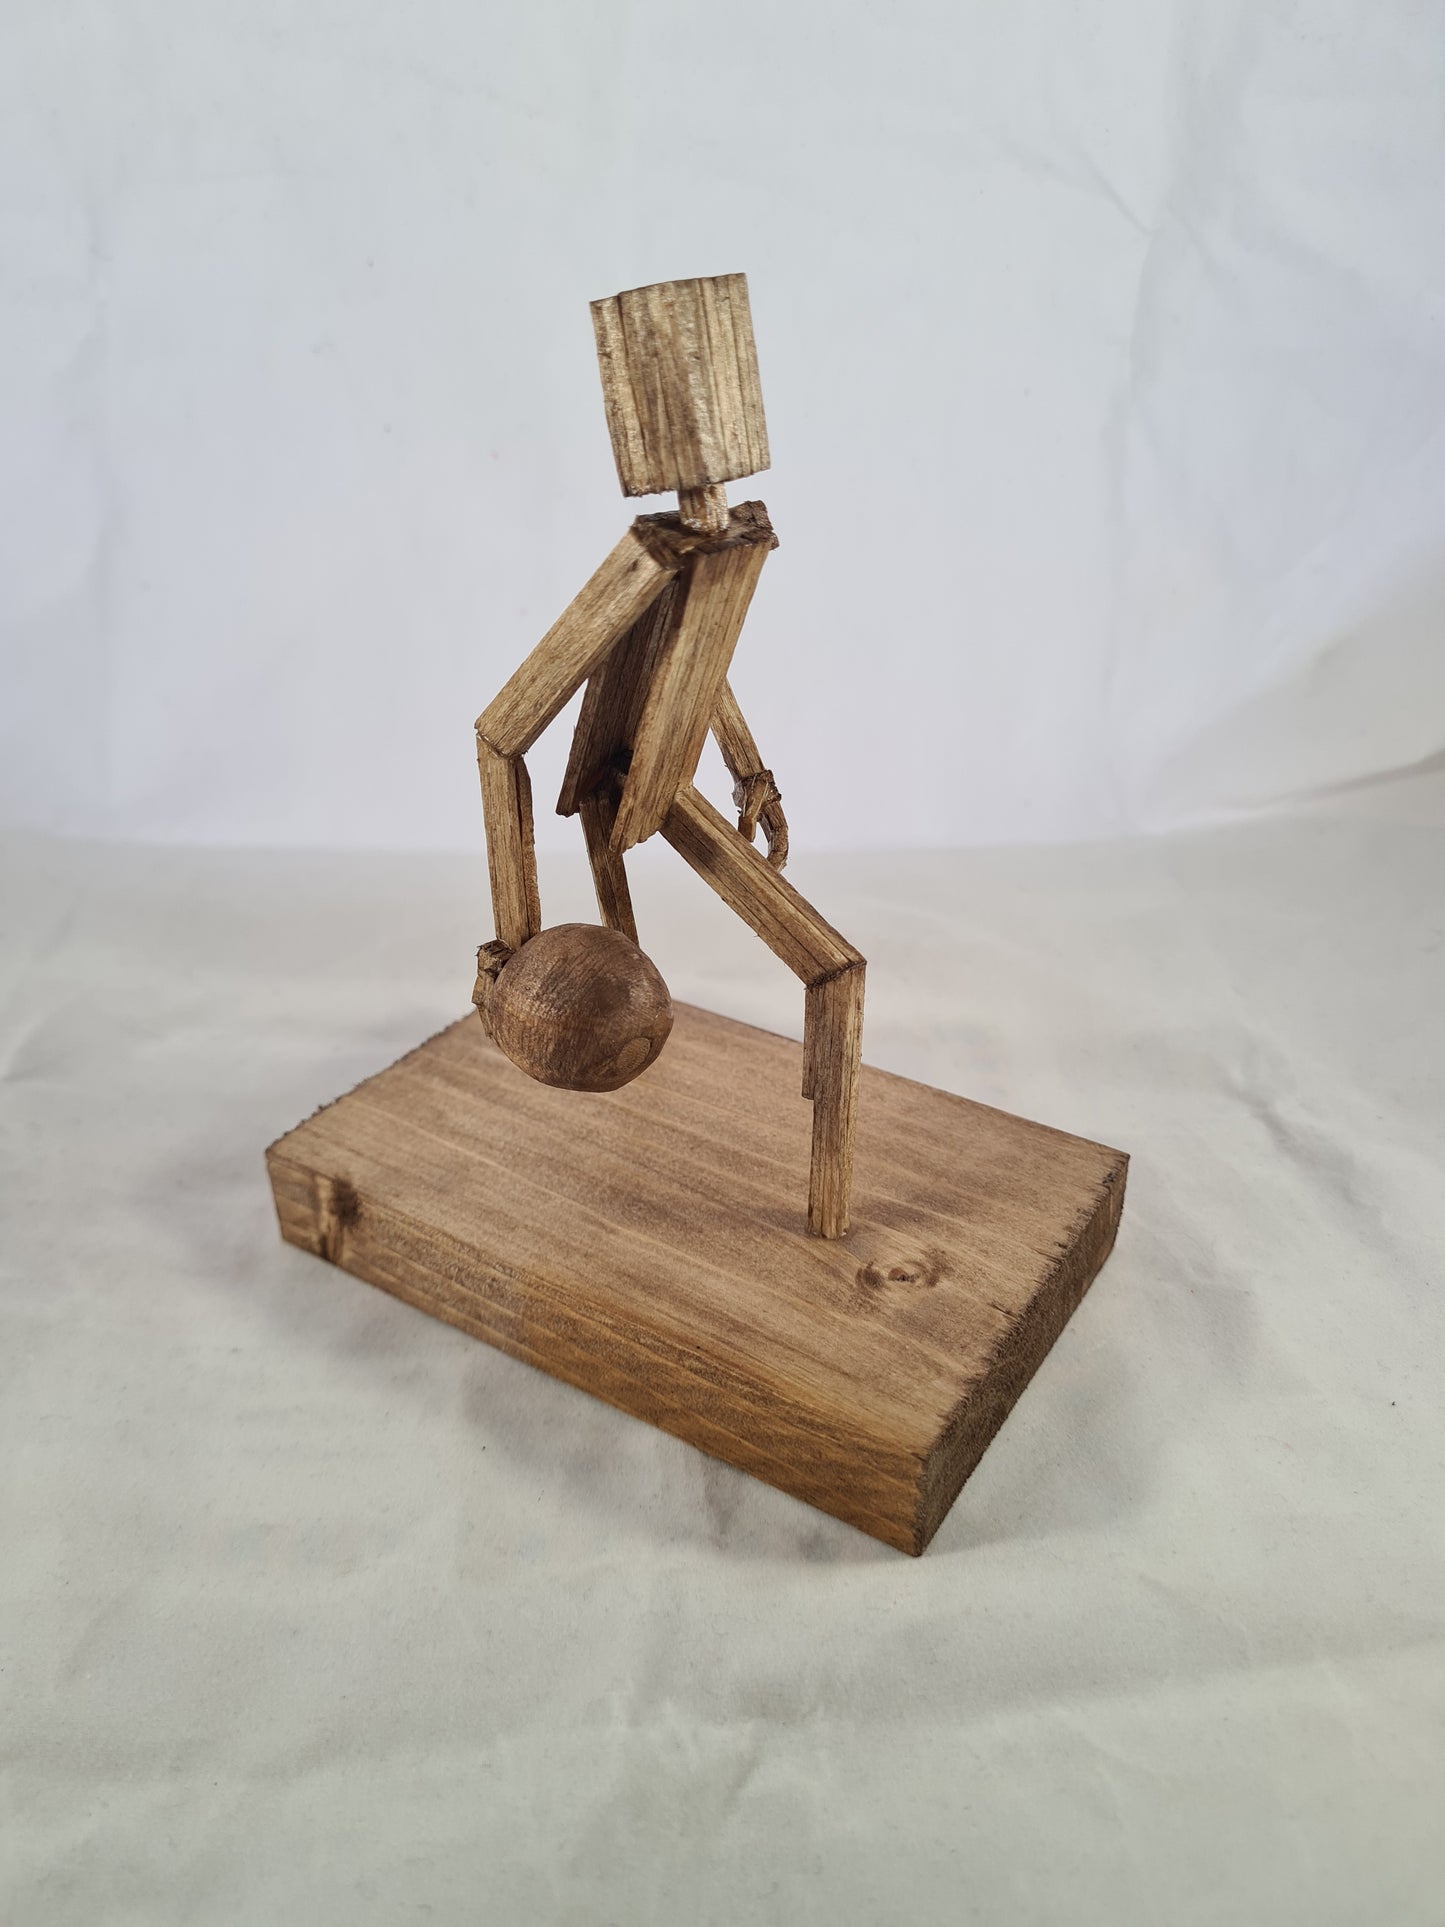 Bowler - Handcrafted Wooden Matchstick Figures - Gifts, Ornaments and Decor By Tiggidy Designs